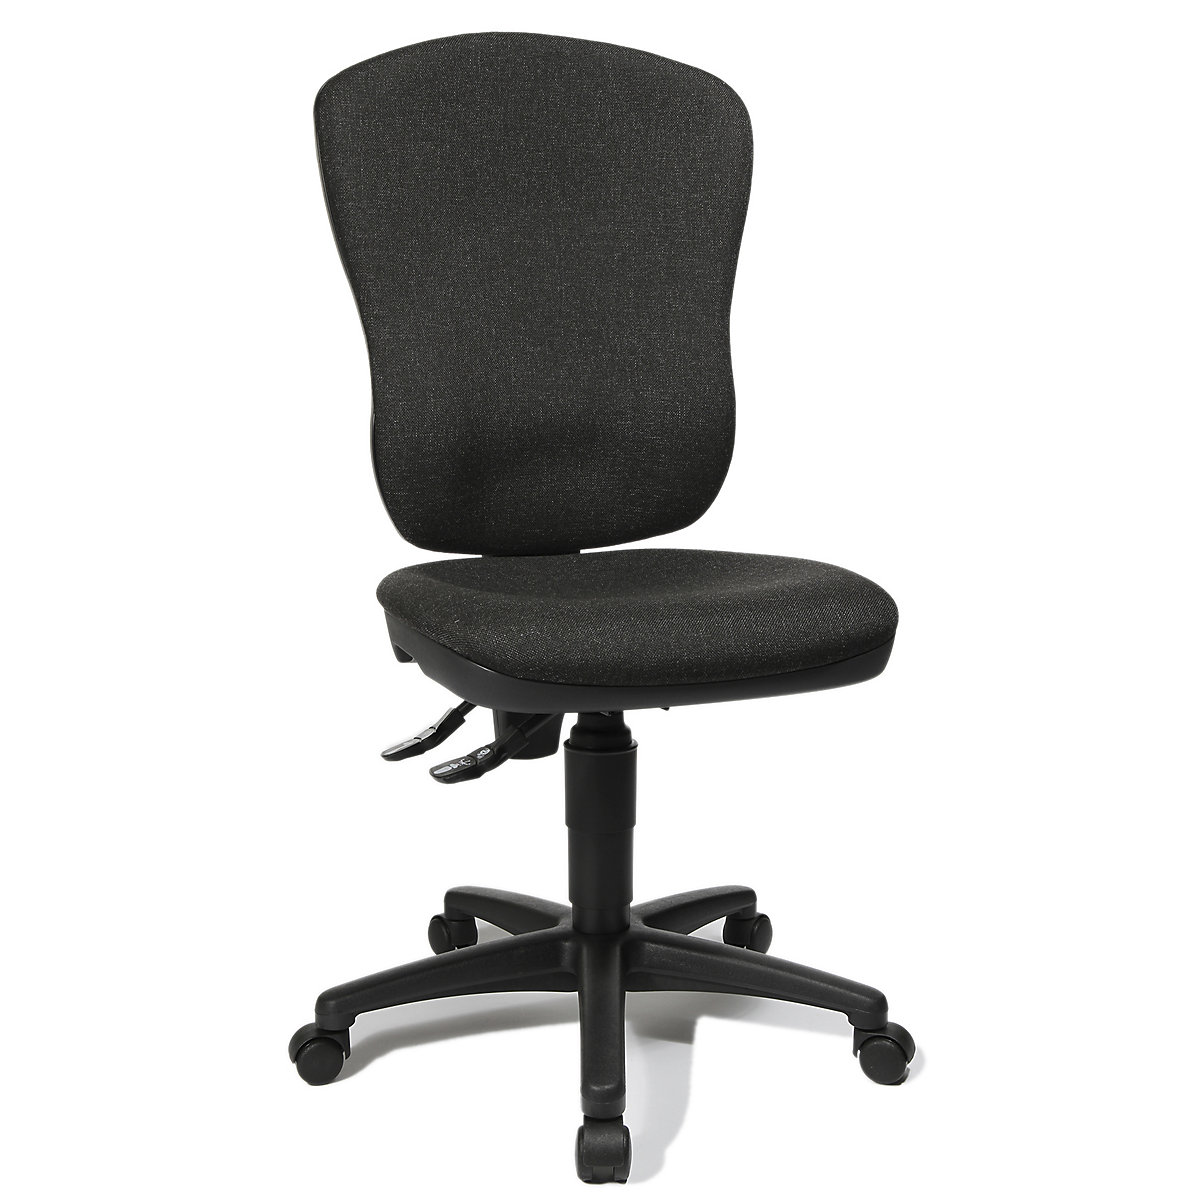 Standard swivel chair – Topstar, without arm rests, with lumbar support, back rest height 570 mm, anthracite covering-5